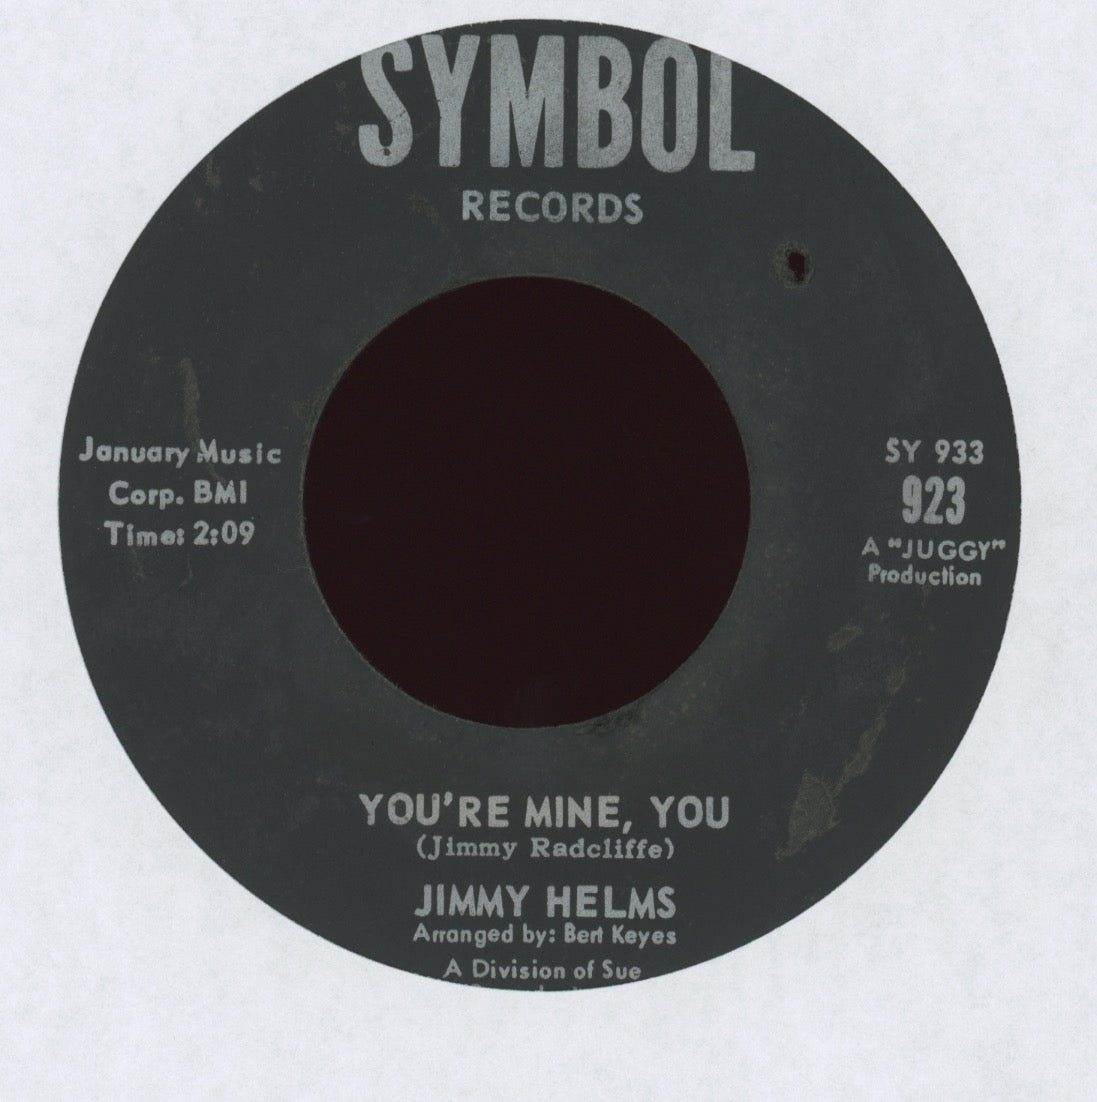 Jimmy Helms - You're Mine, You / Susie's Gone on Symbol